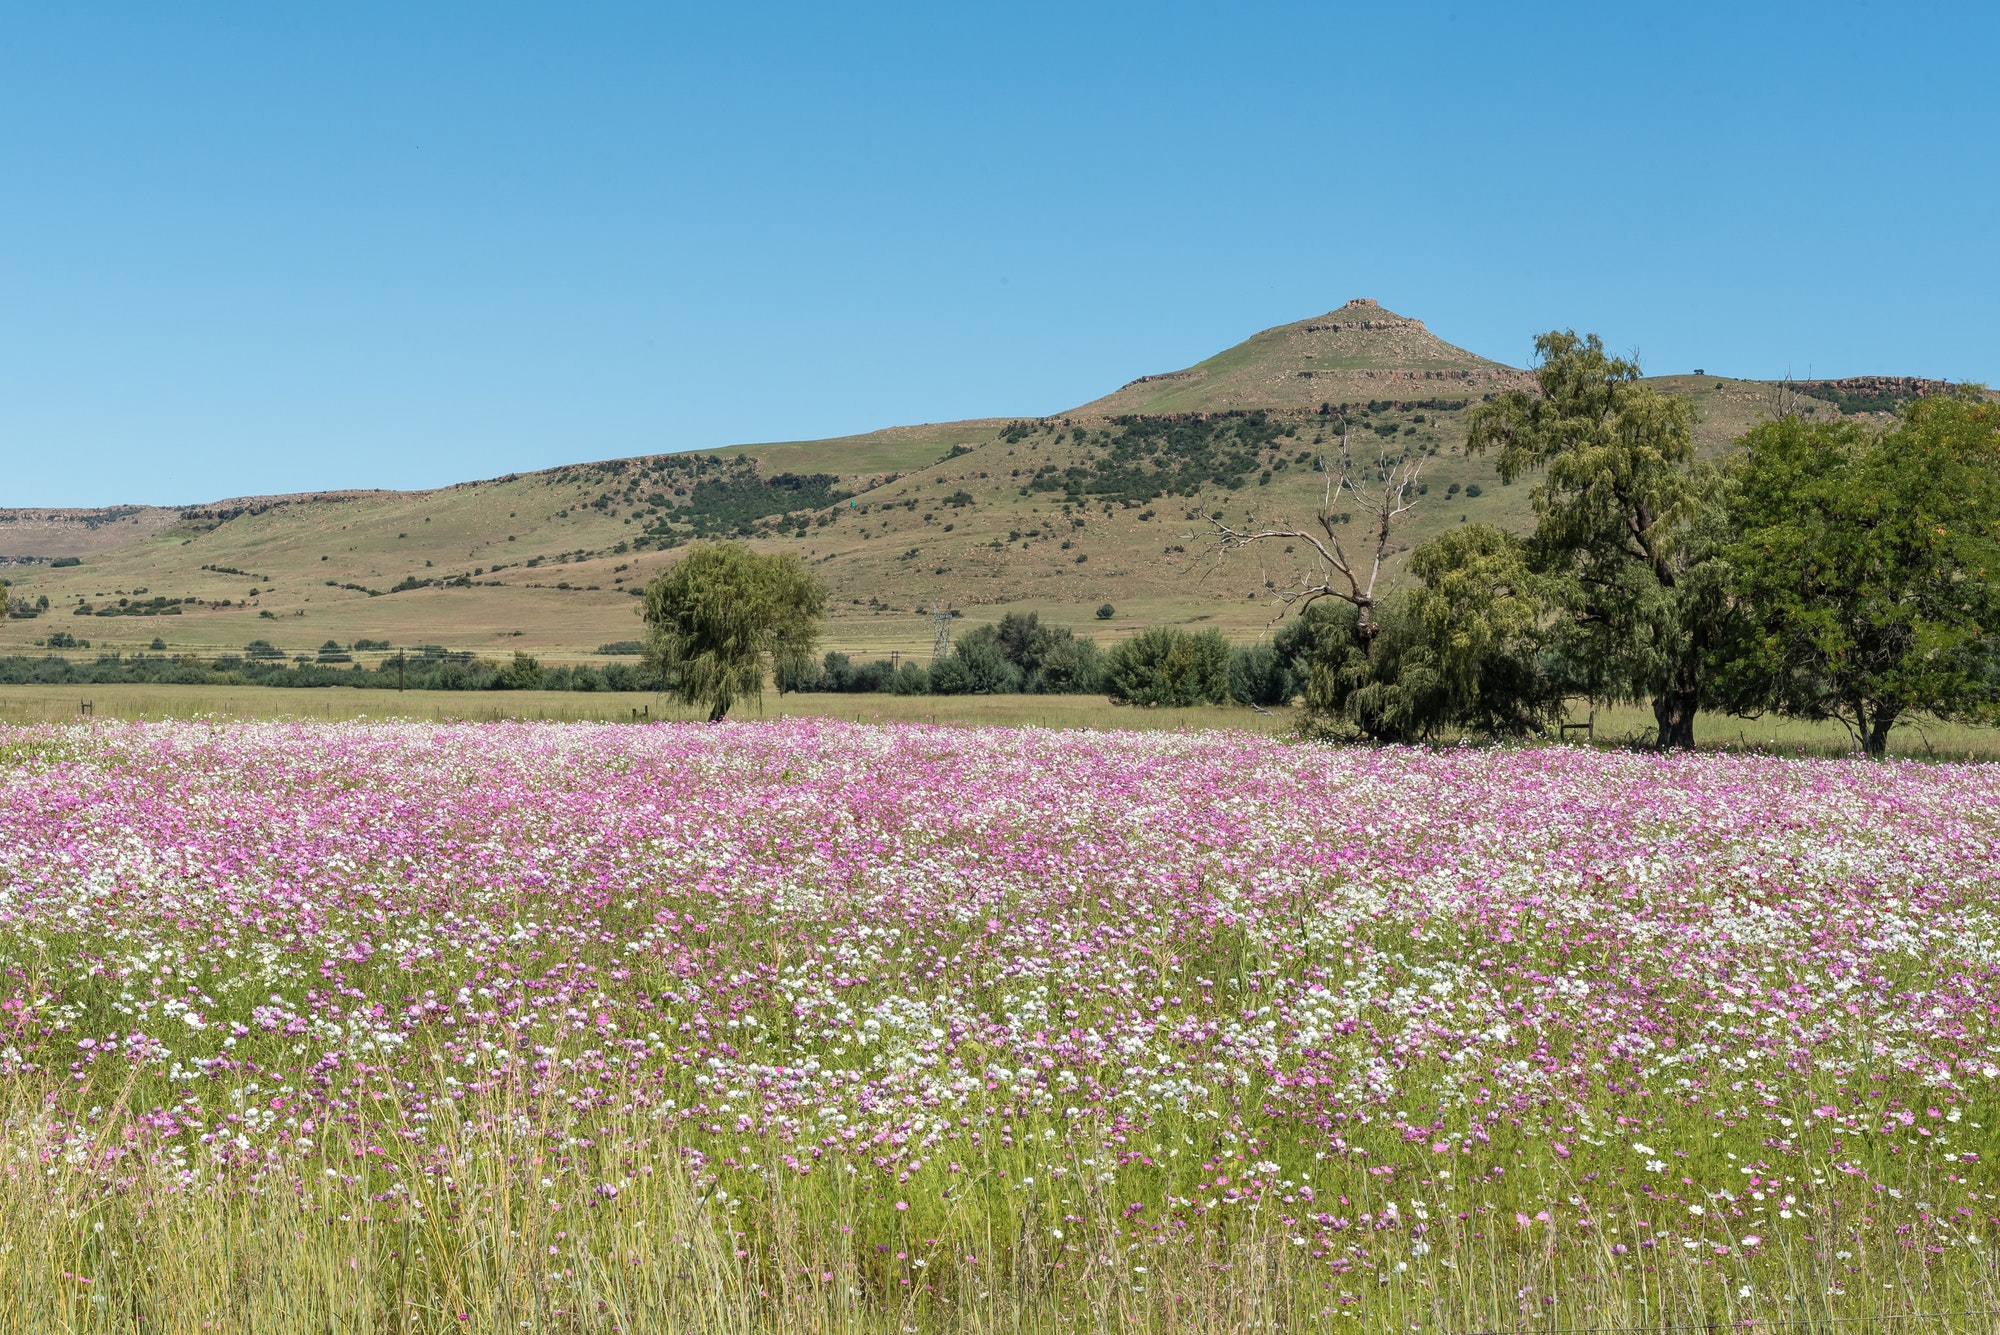 White and pink cosmos flowers near Matatiele